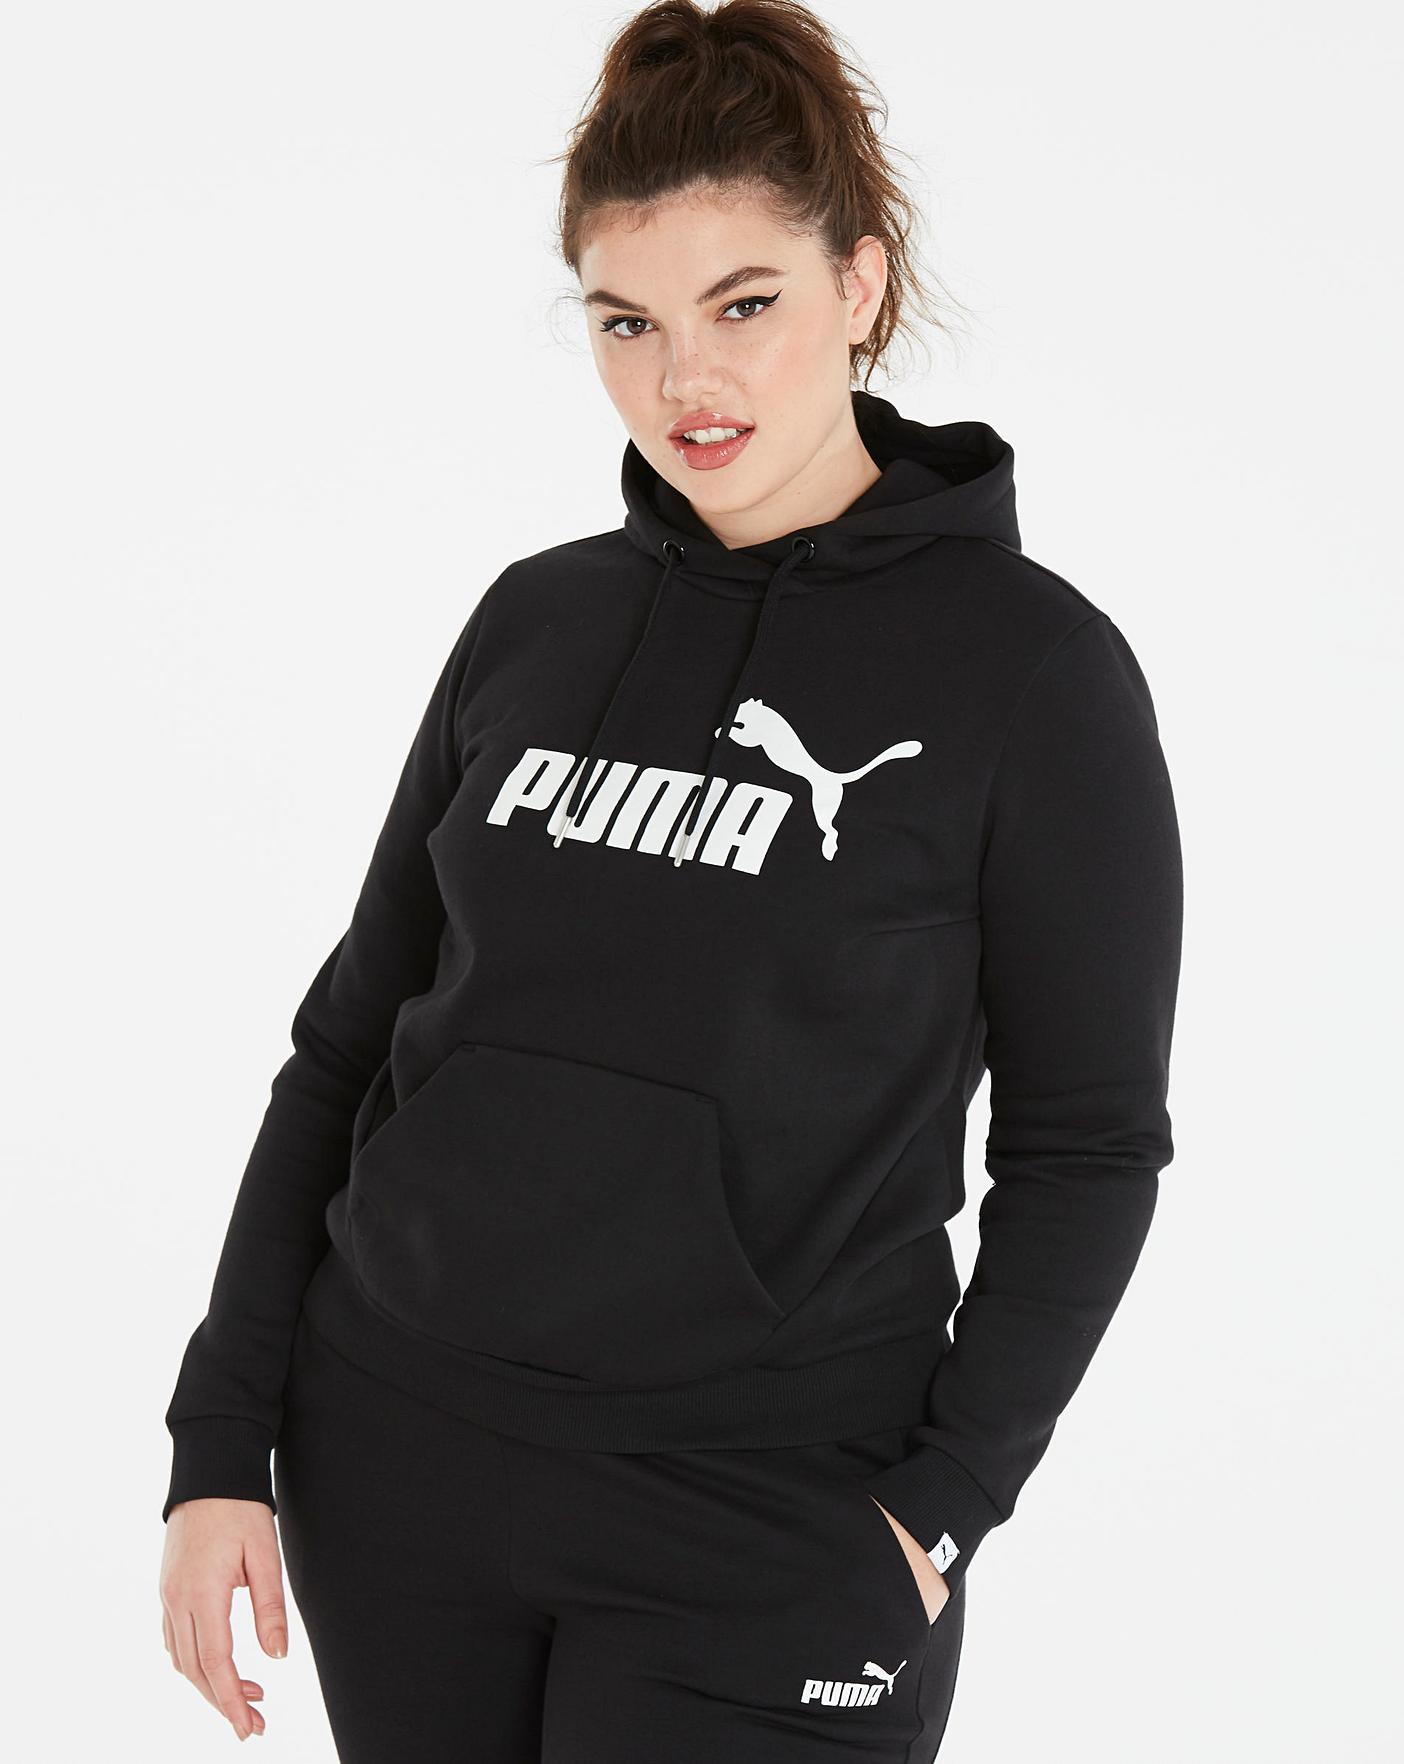 Buy > puma joggers and hoodie > in stock